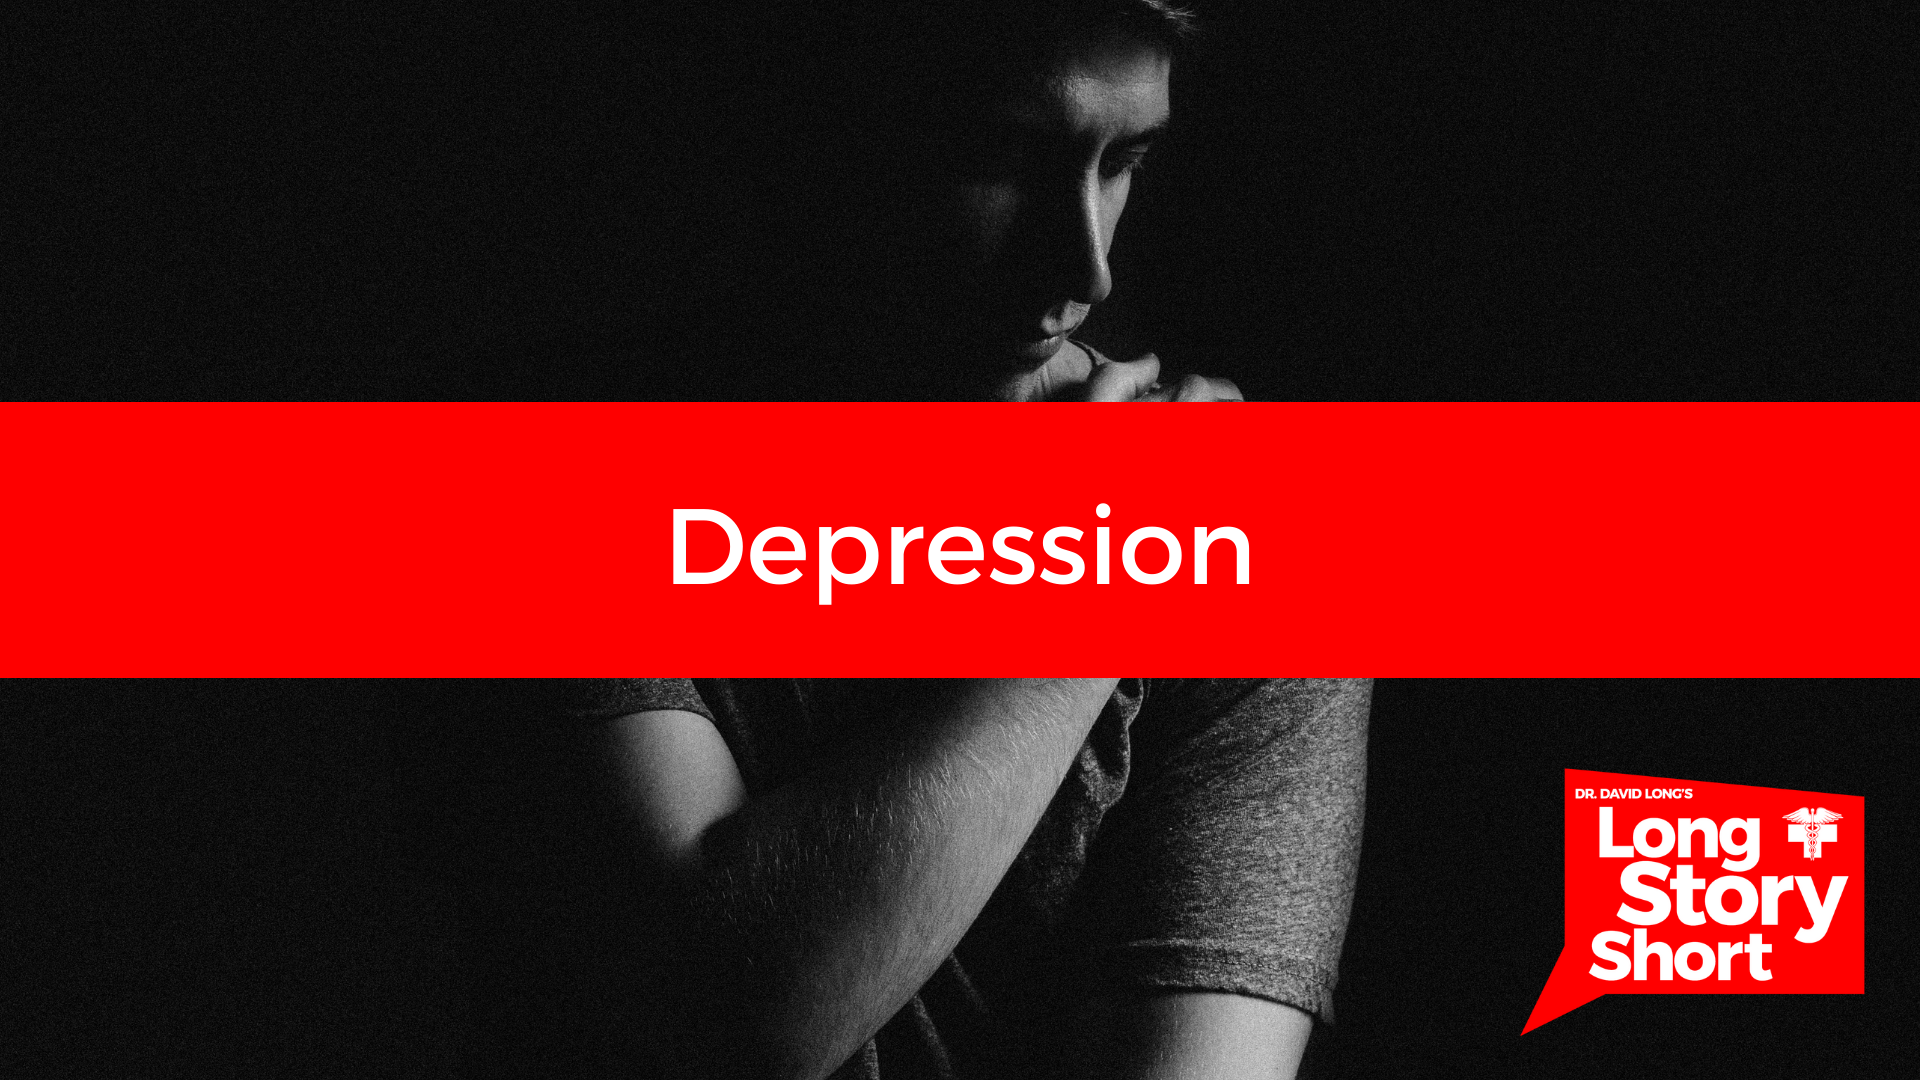 You are currently viewing Depression – Dr. David Long